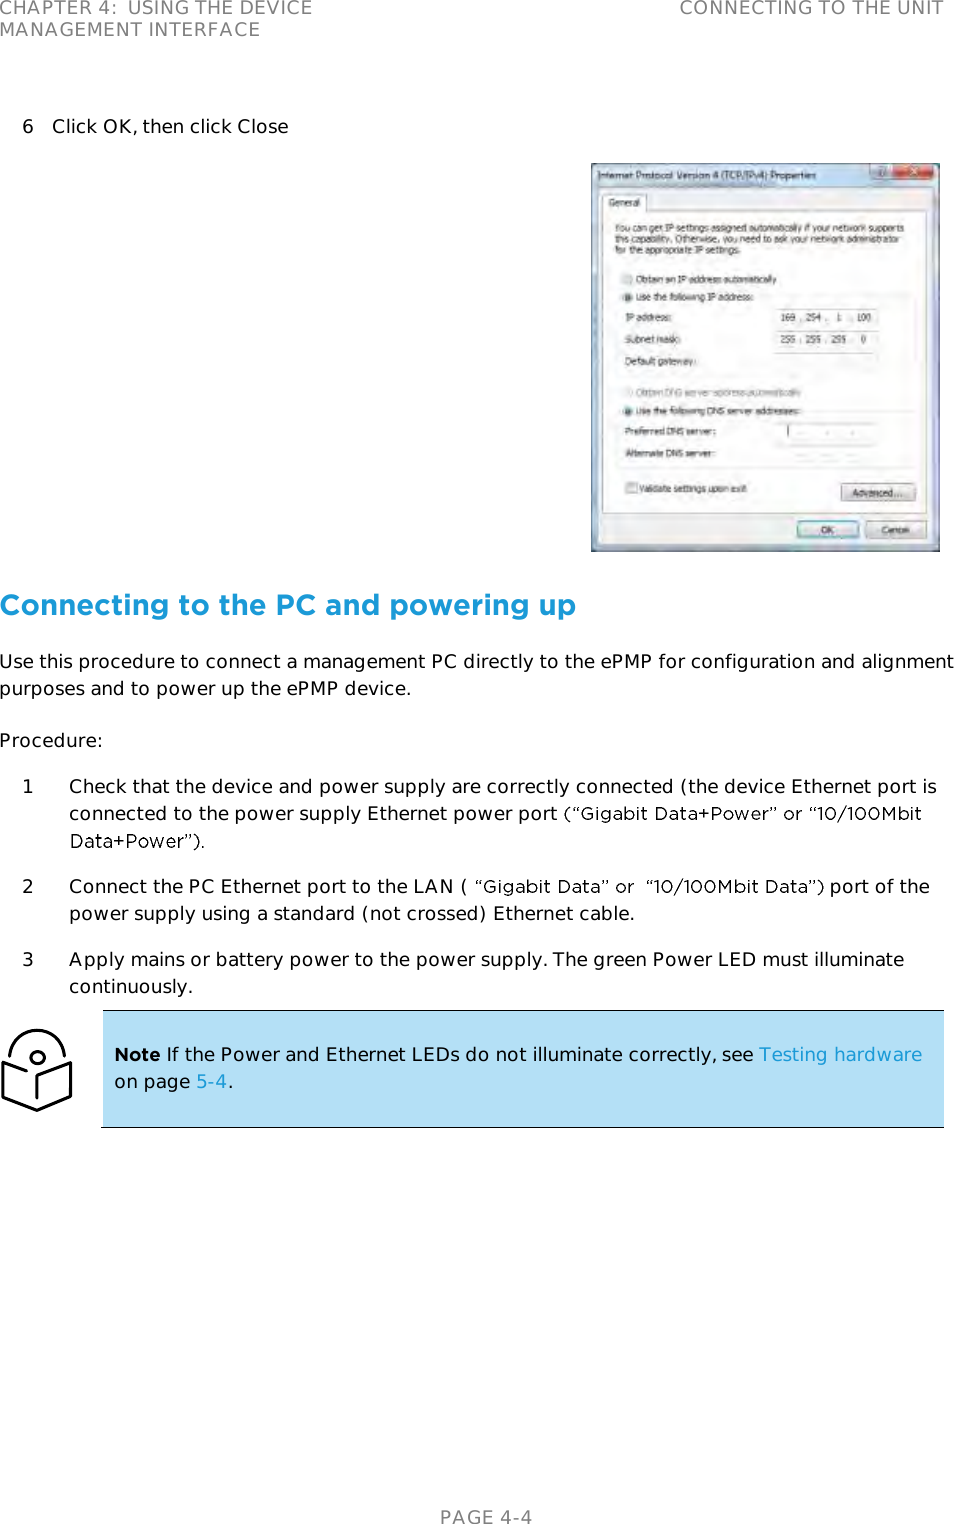 CHAPTER 4:  USING THE DEVICE MANAGEMENT INTERFACE CONNECTING TO THE UNIT   PAGE 4-4 6 Click OK, then click Close  Connecting to the PC and powering up Use this procedure to connect a management PC directly to the ePMP for configuration and alignment purposes and to power up the ePMP device. Procedure: 1 Check that the device and power supply are correctly connected (the device Ethernet port is connected to the power supply Ethernet power port  2 Connect the PC Ethernet port to the LAN (     port of the power supply using a standard (not crossed) Ethernet cable. 3 Apply mains or battery power to the power supply. The green Power LED must illuminate continuously.  Note If the Power and Ethernet LEDs do not illuminate correctly, see Testing hardware on page 5-4.  